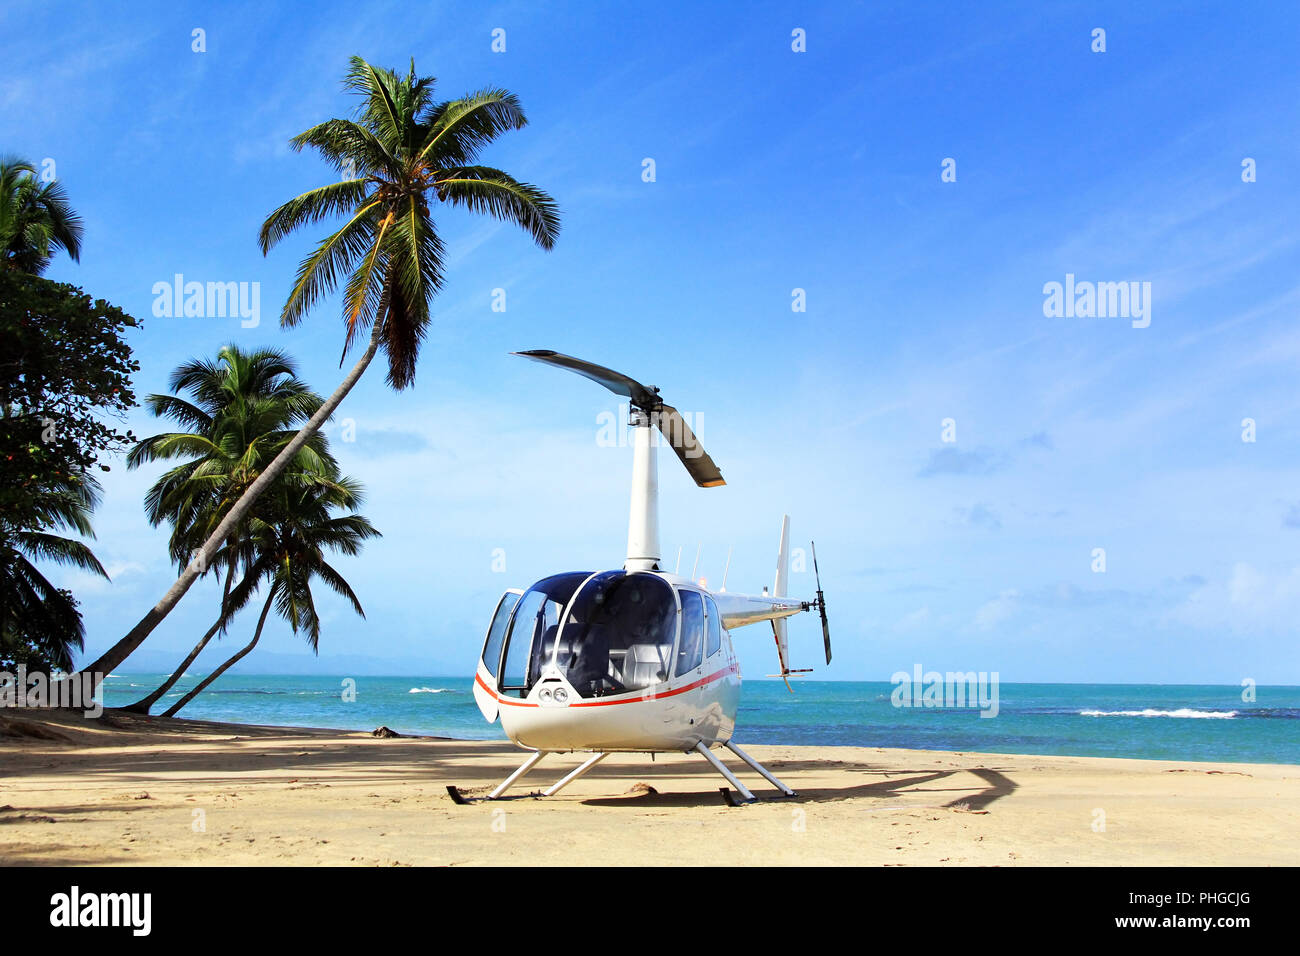 Small helicopter for excursions on a deserted beach. Dominican Republic Stock Photo